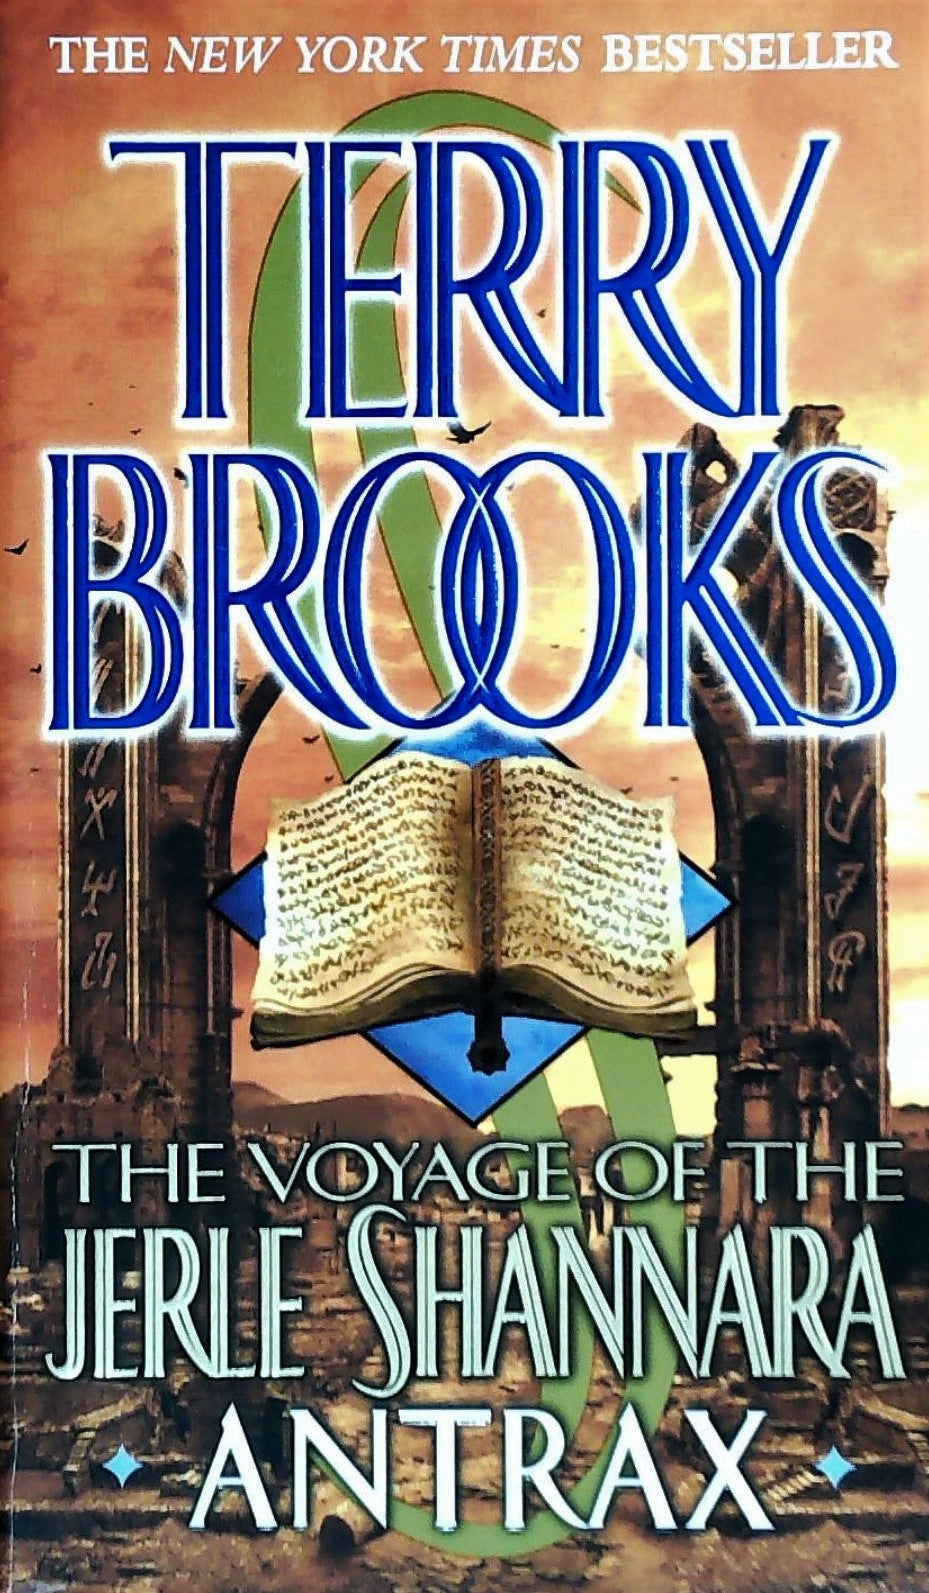 Livre ISBN 0345397673 Antrax The Voyage of the Jerle Shannara Book Two (Terry Brooks)